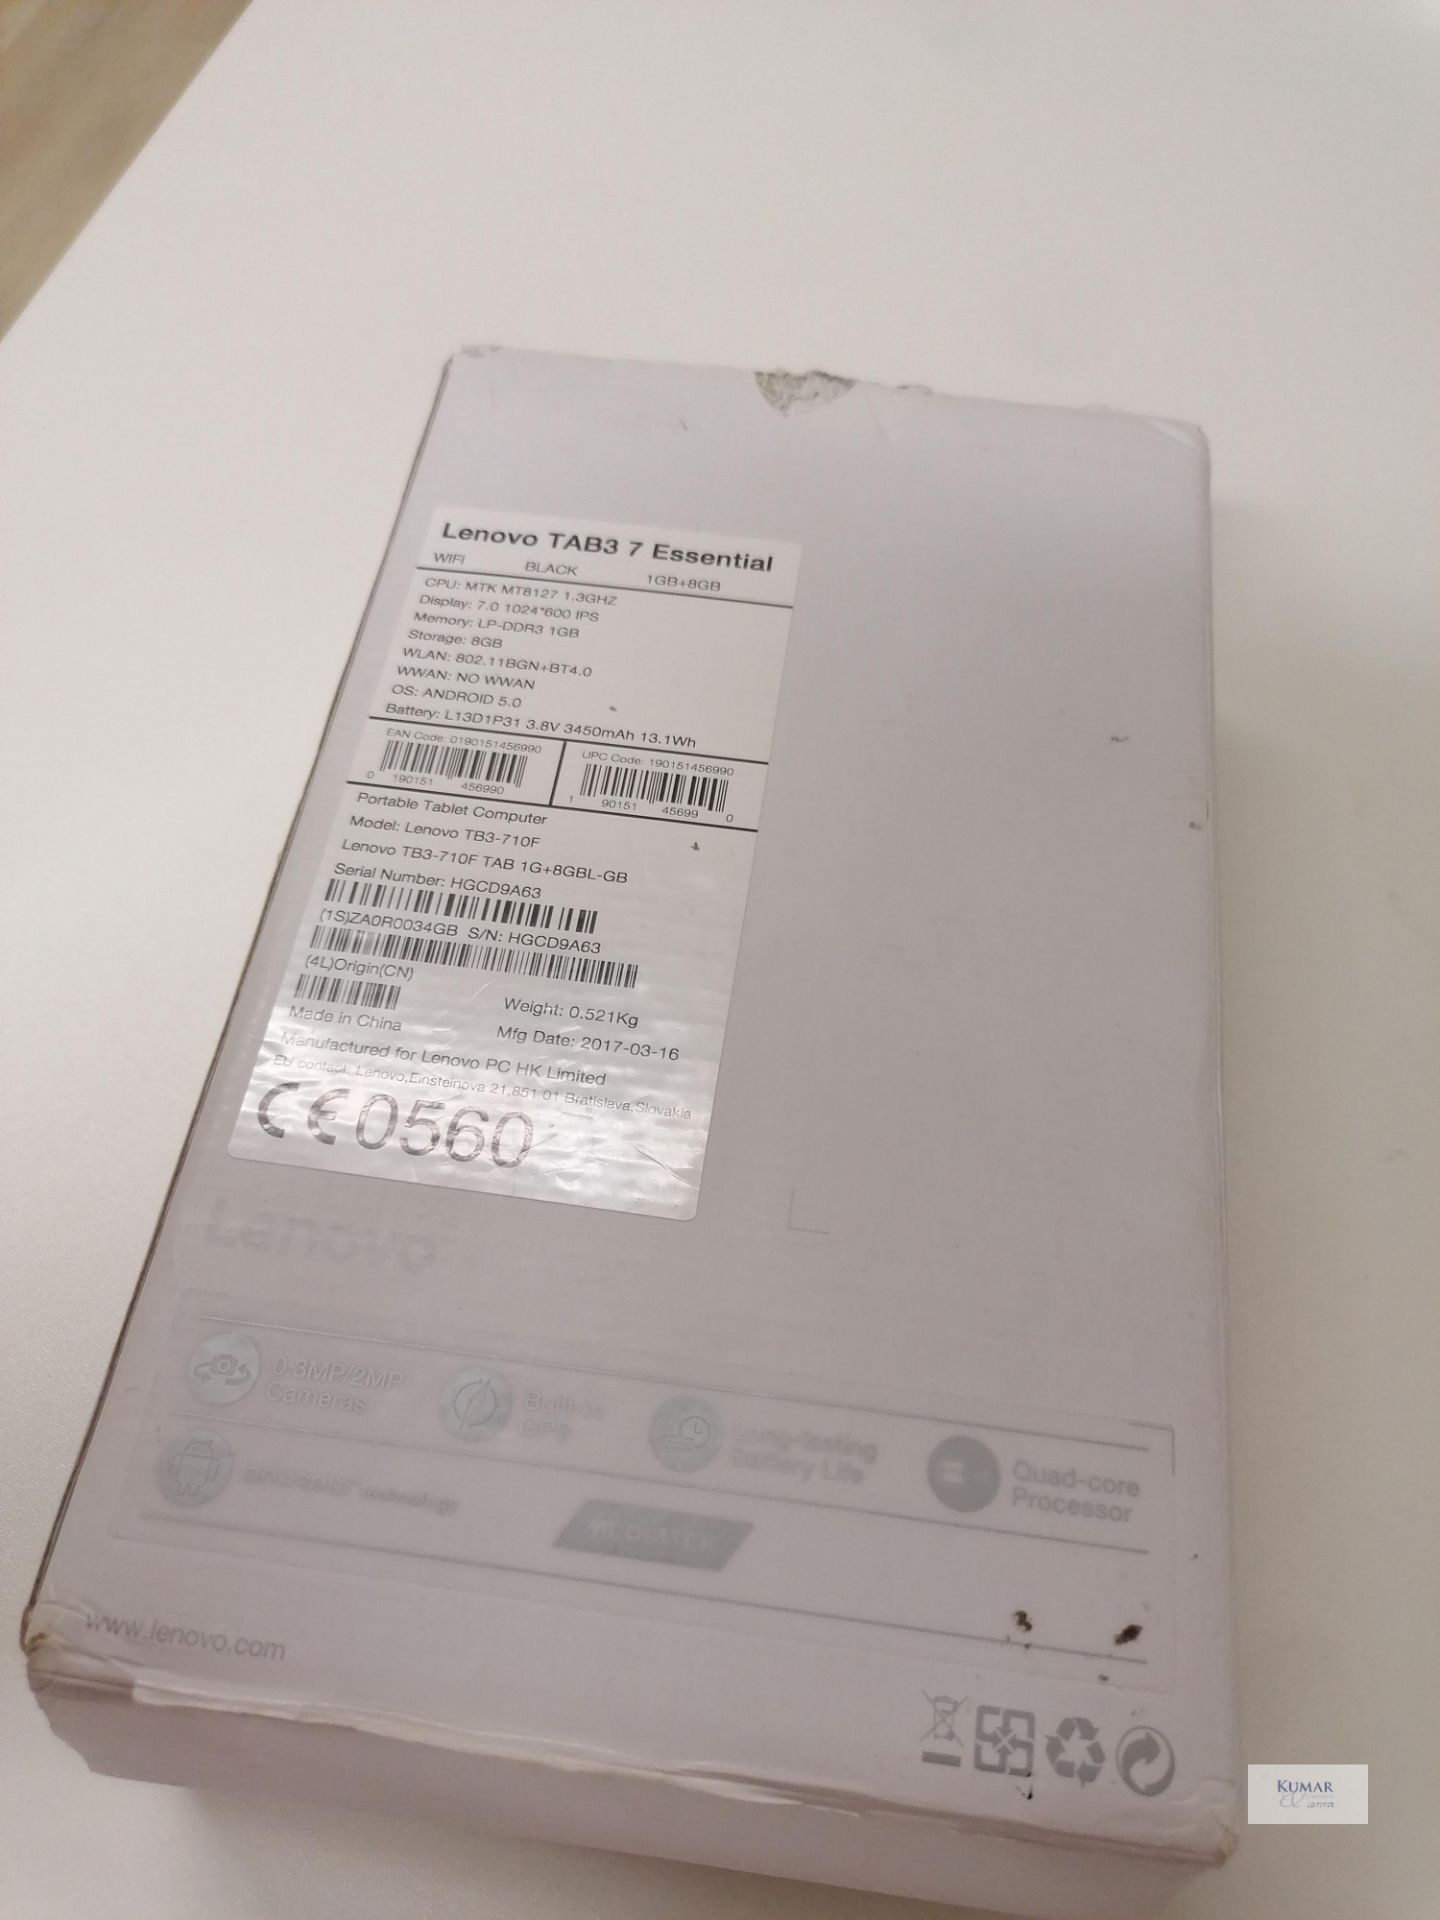 Lenovo TB3-710F 7" 16GB Table Man 16 03 2107 Updated 21 10 2020 In box,cable and charger - Image 5 of 5